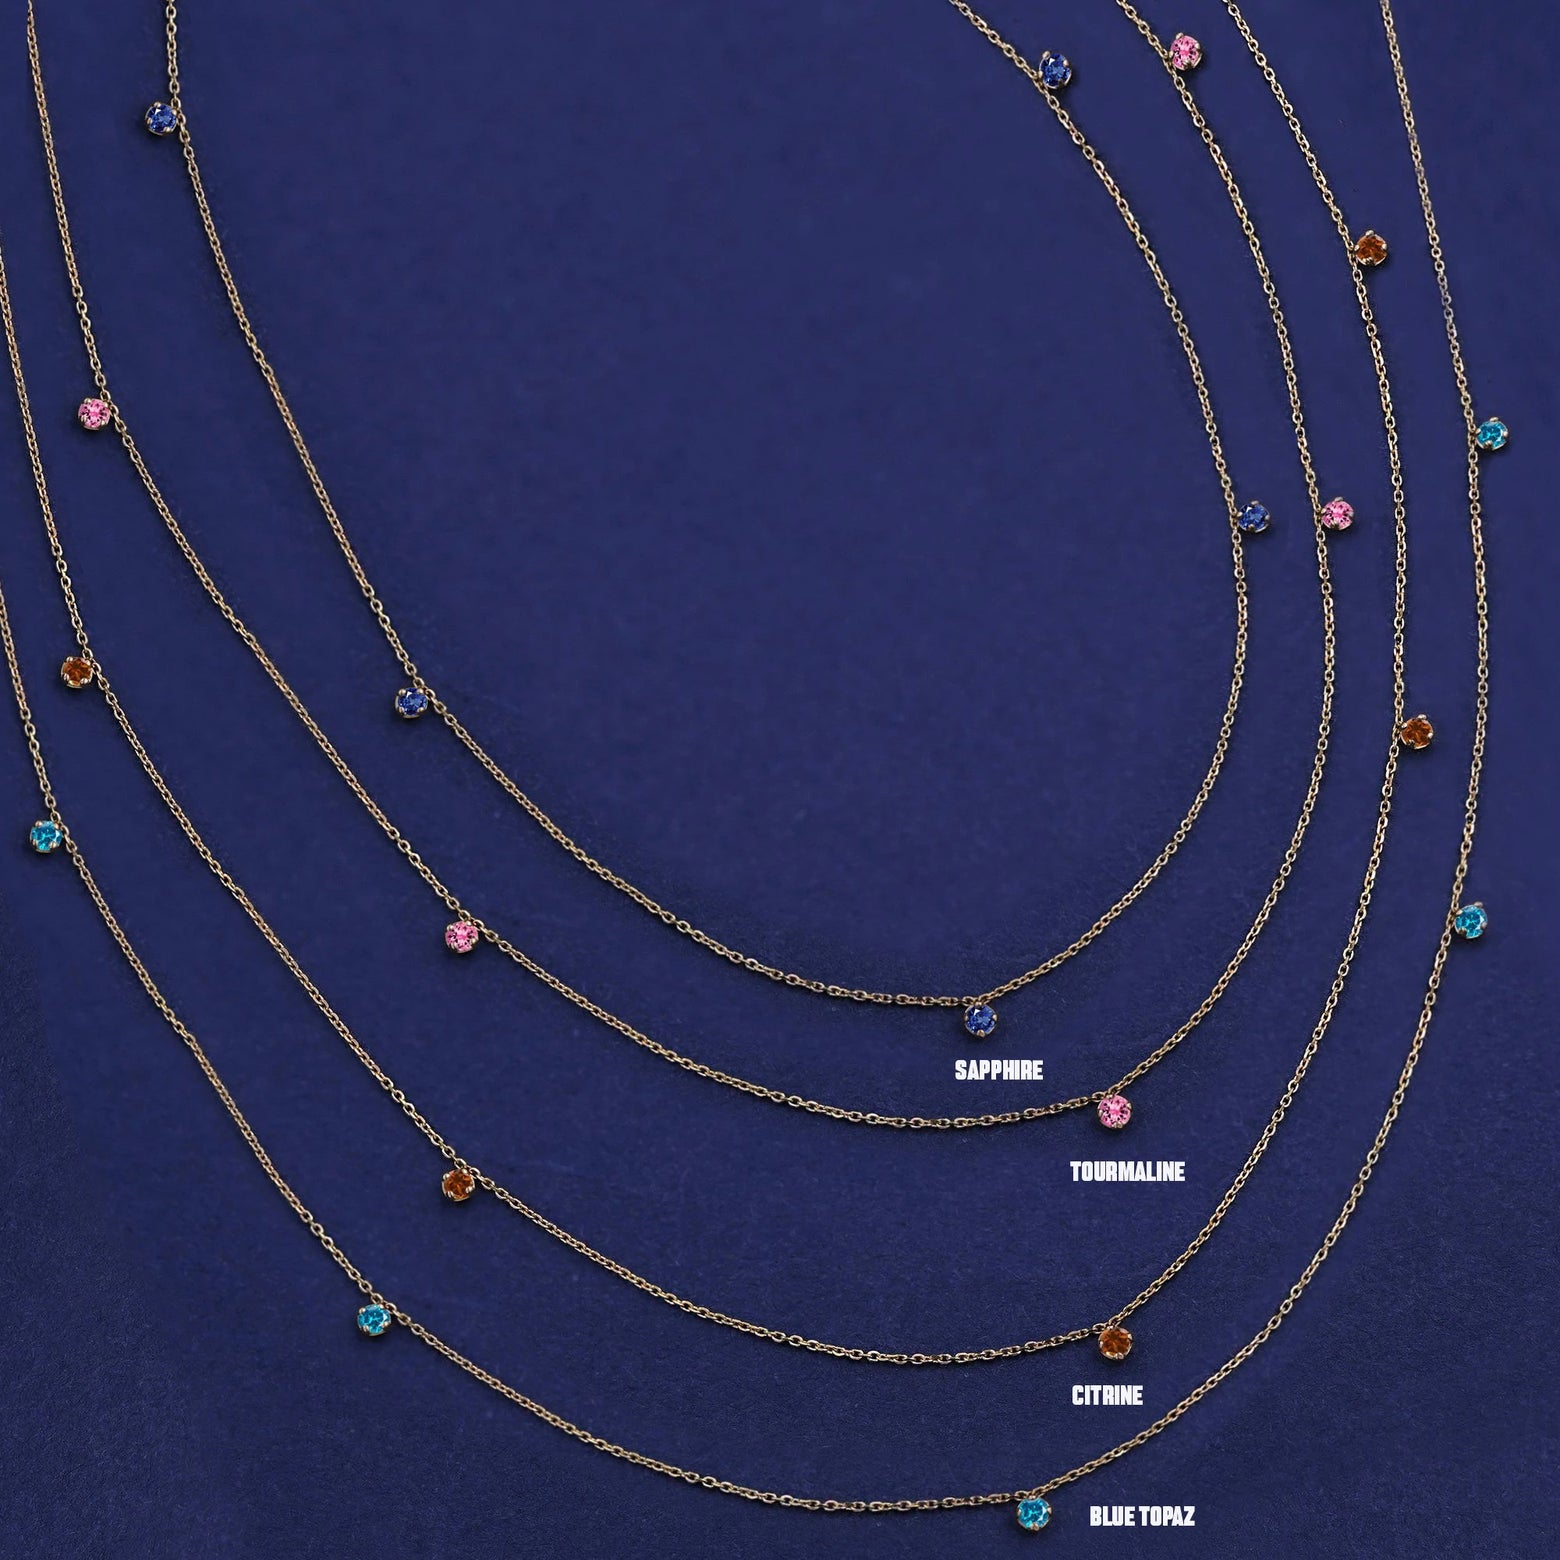 Four versions of the solid yellow gold 5 Gemstone Cable Necklace showing different stone options